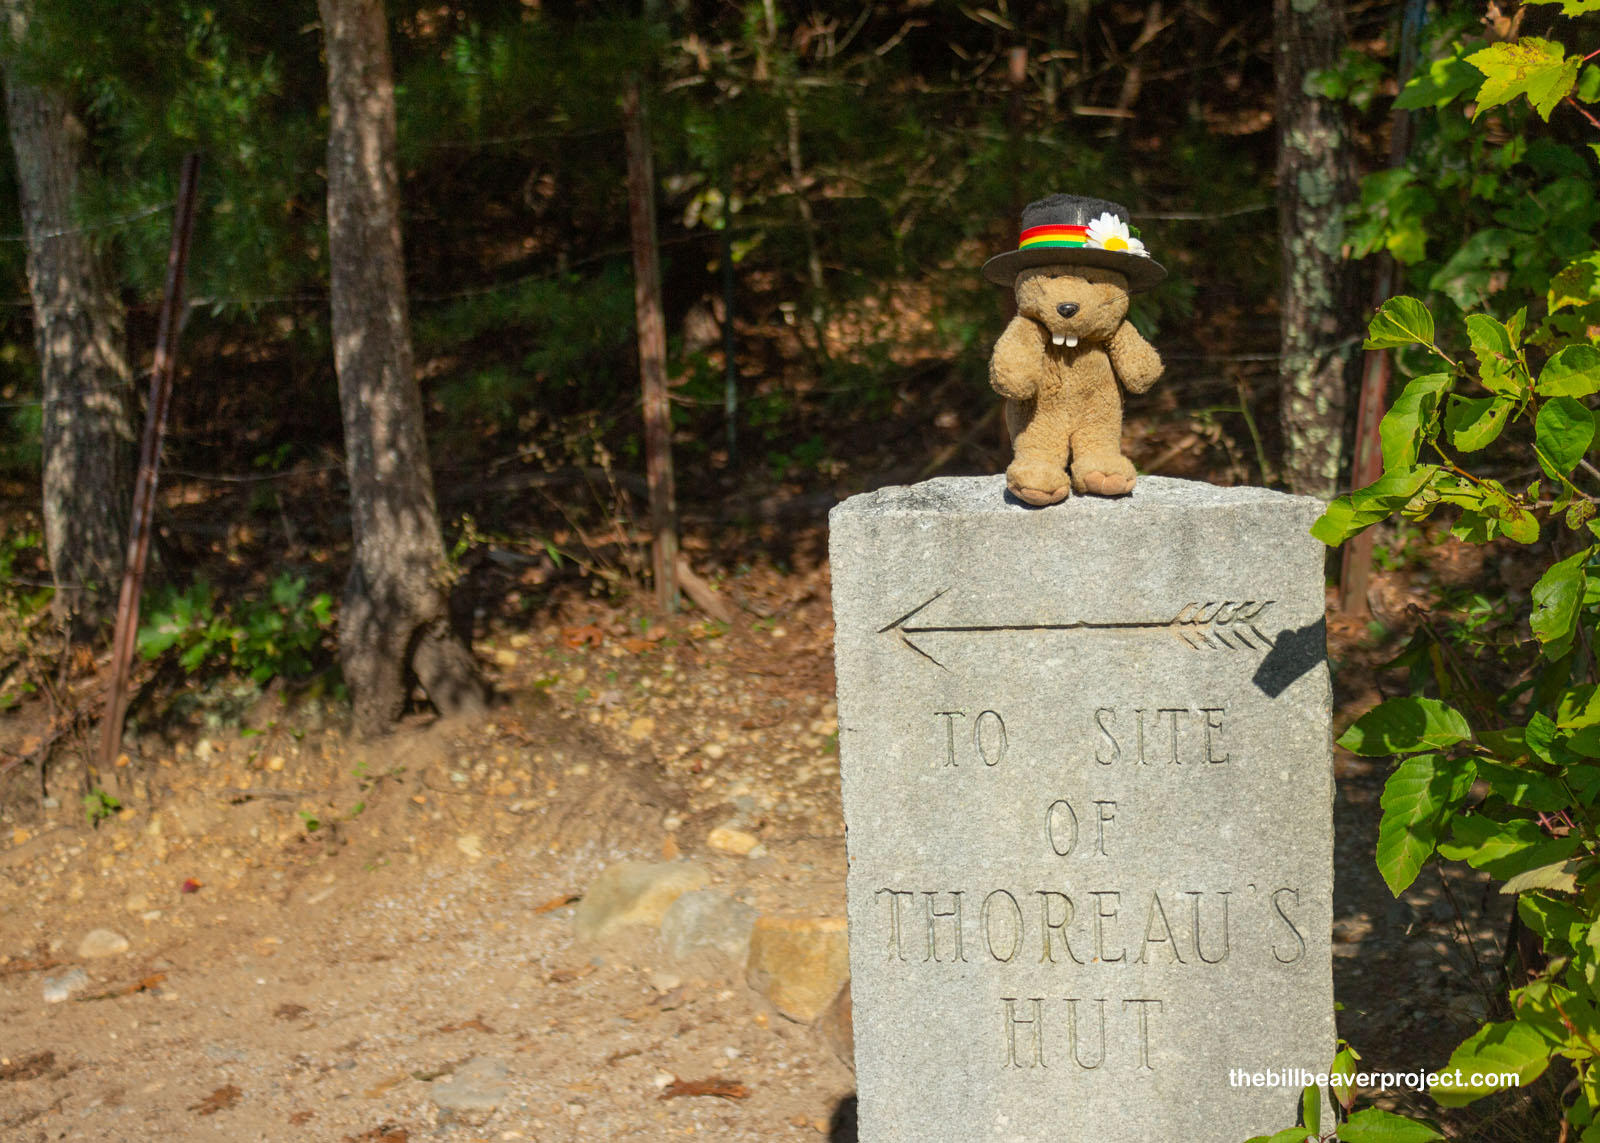 The trail to Thoreau's cabin!